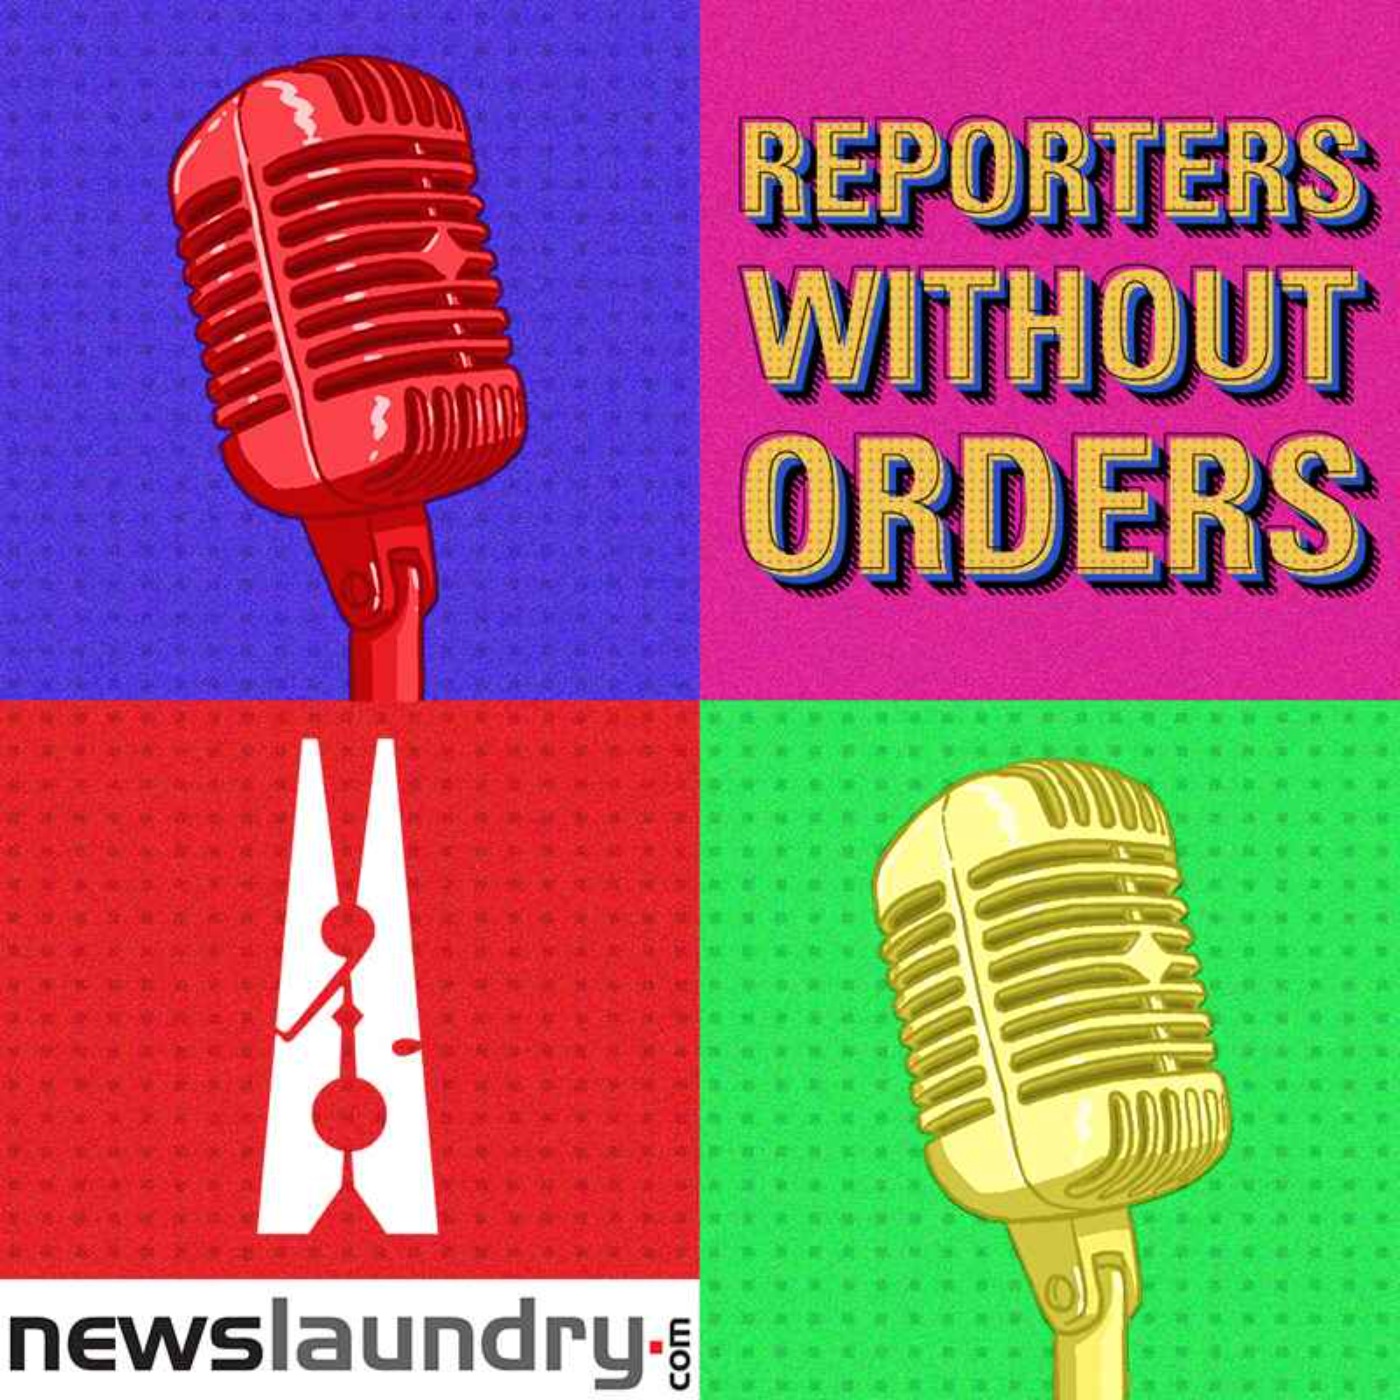 Reporters Without Orders Ep 319: The state of the BSP, BJP-RSS links to Sainik schools